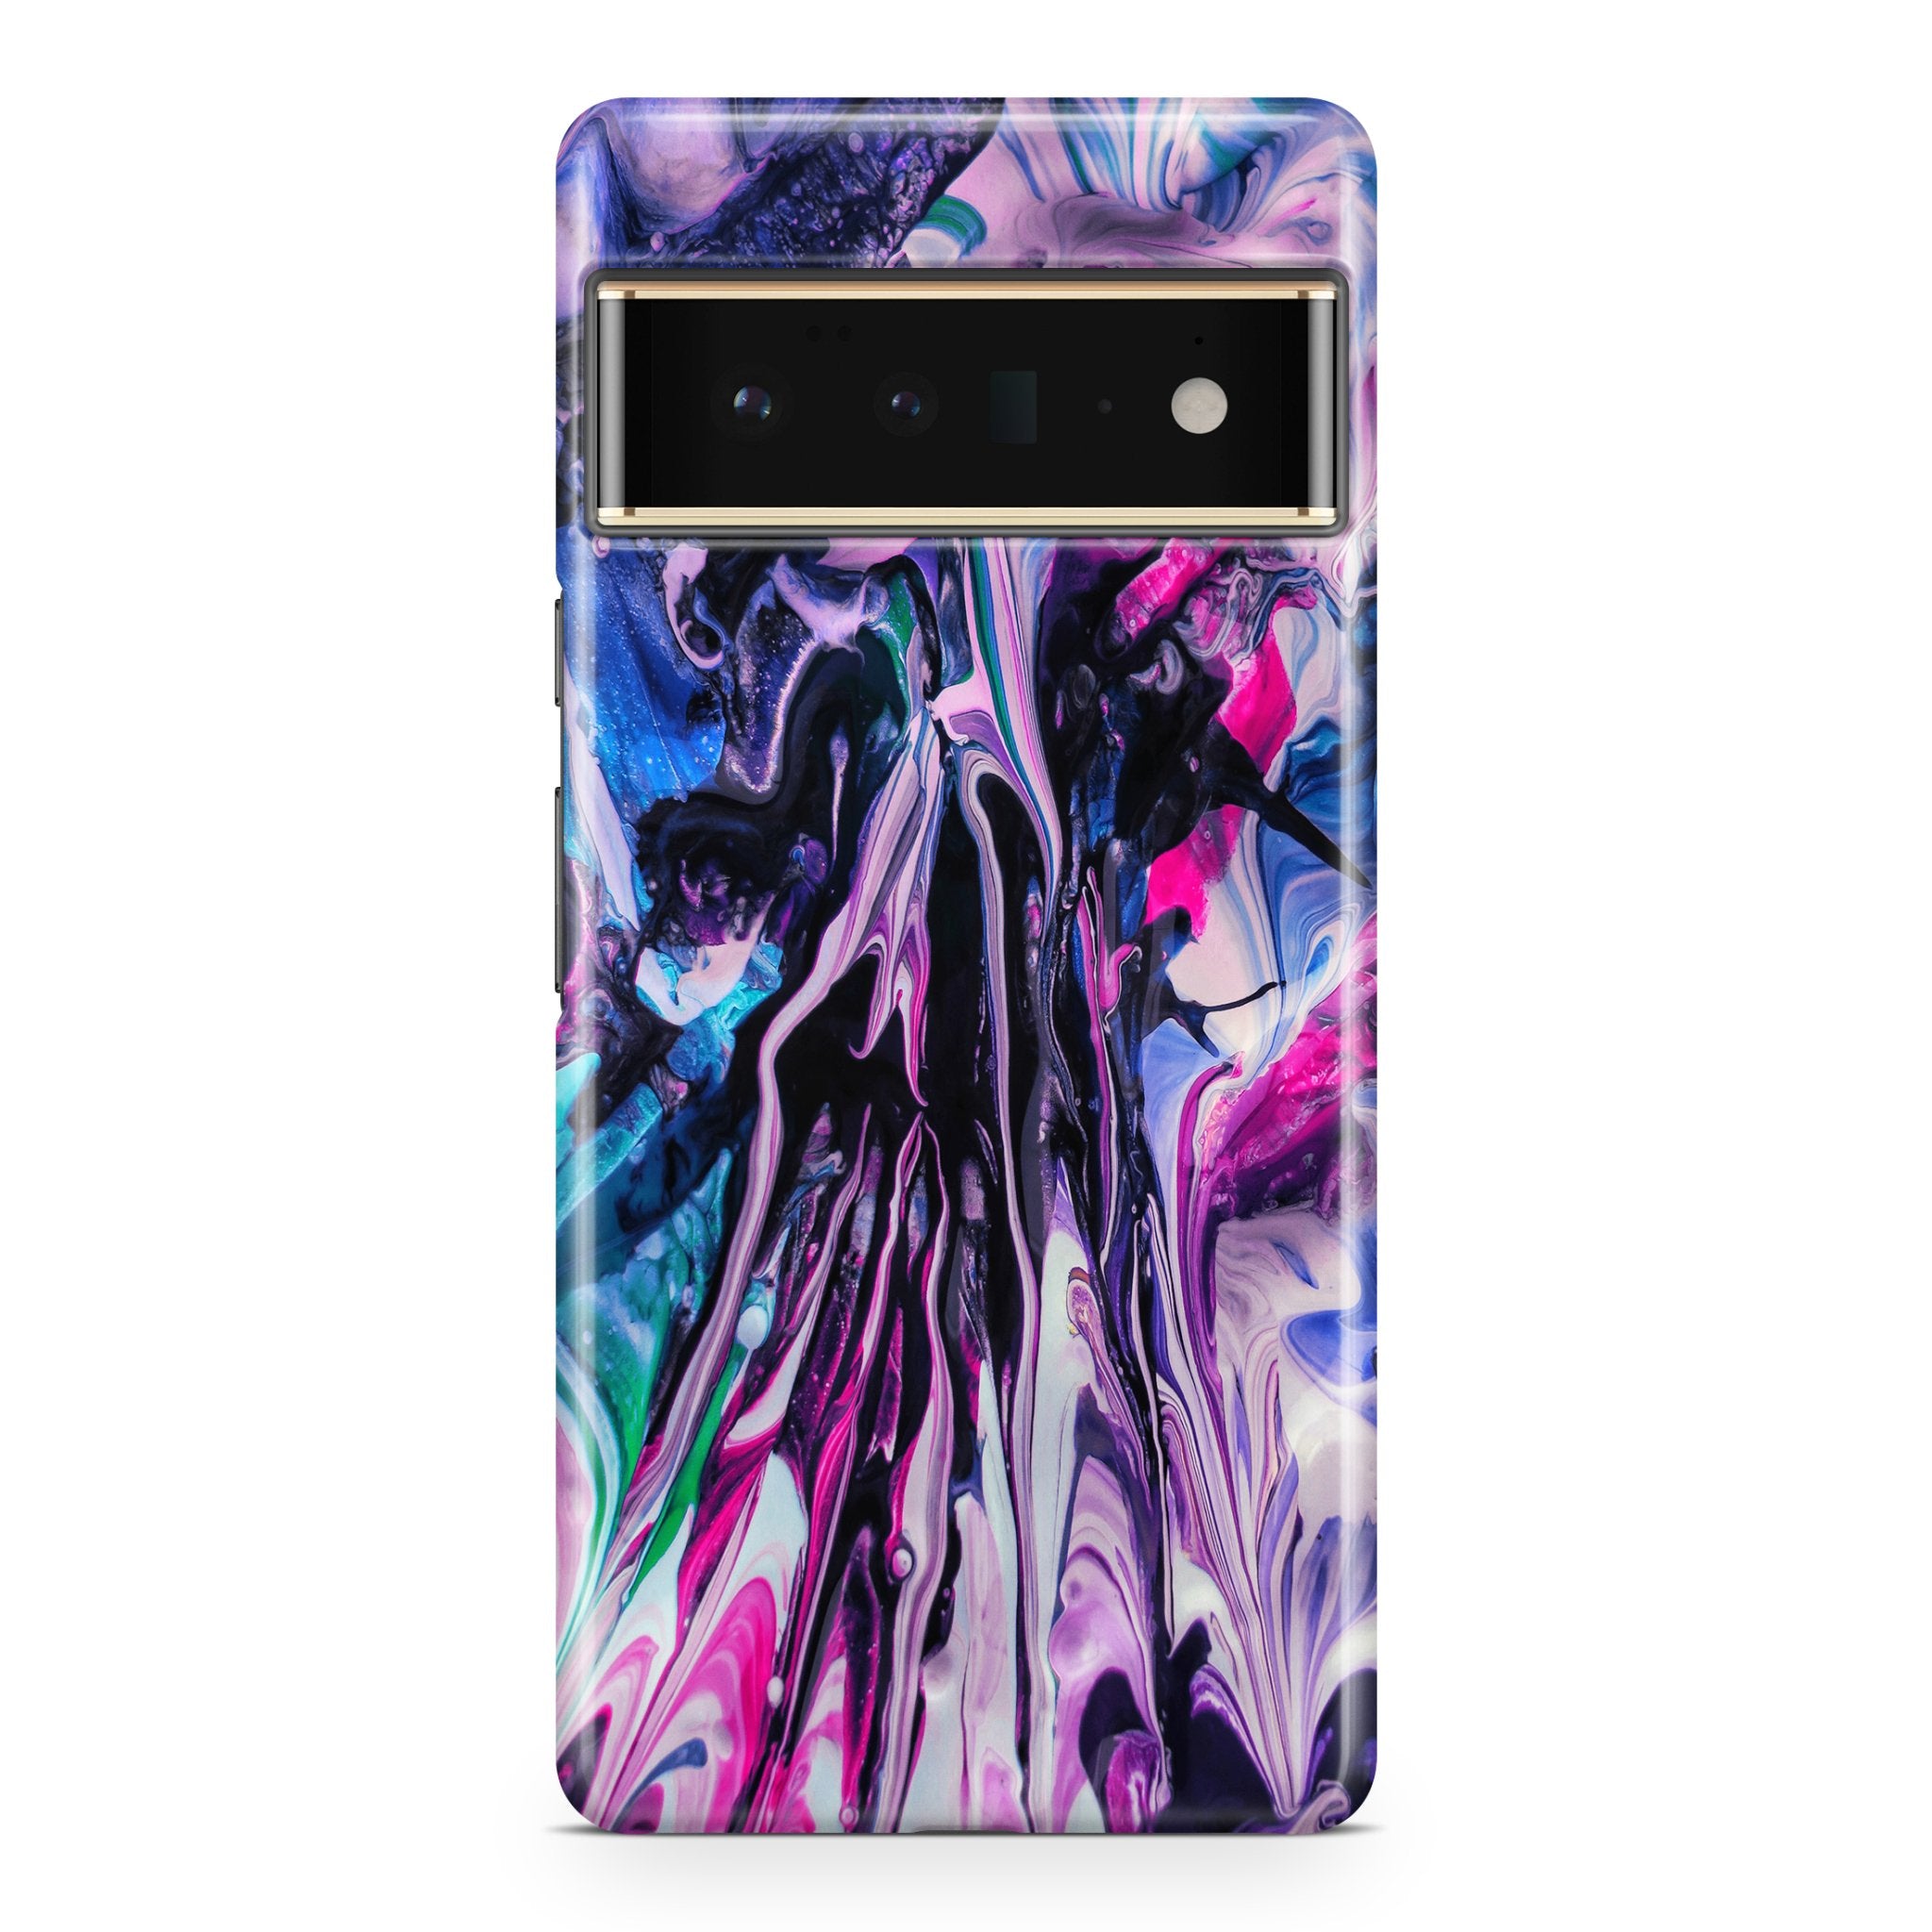 Fluid Acrylic Chaos - Google phone case designs by CaseSwagger